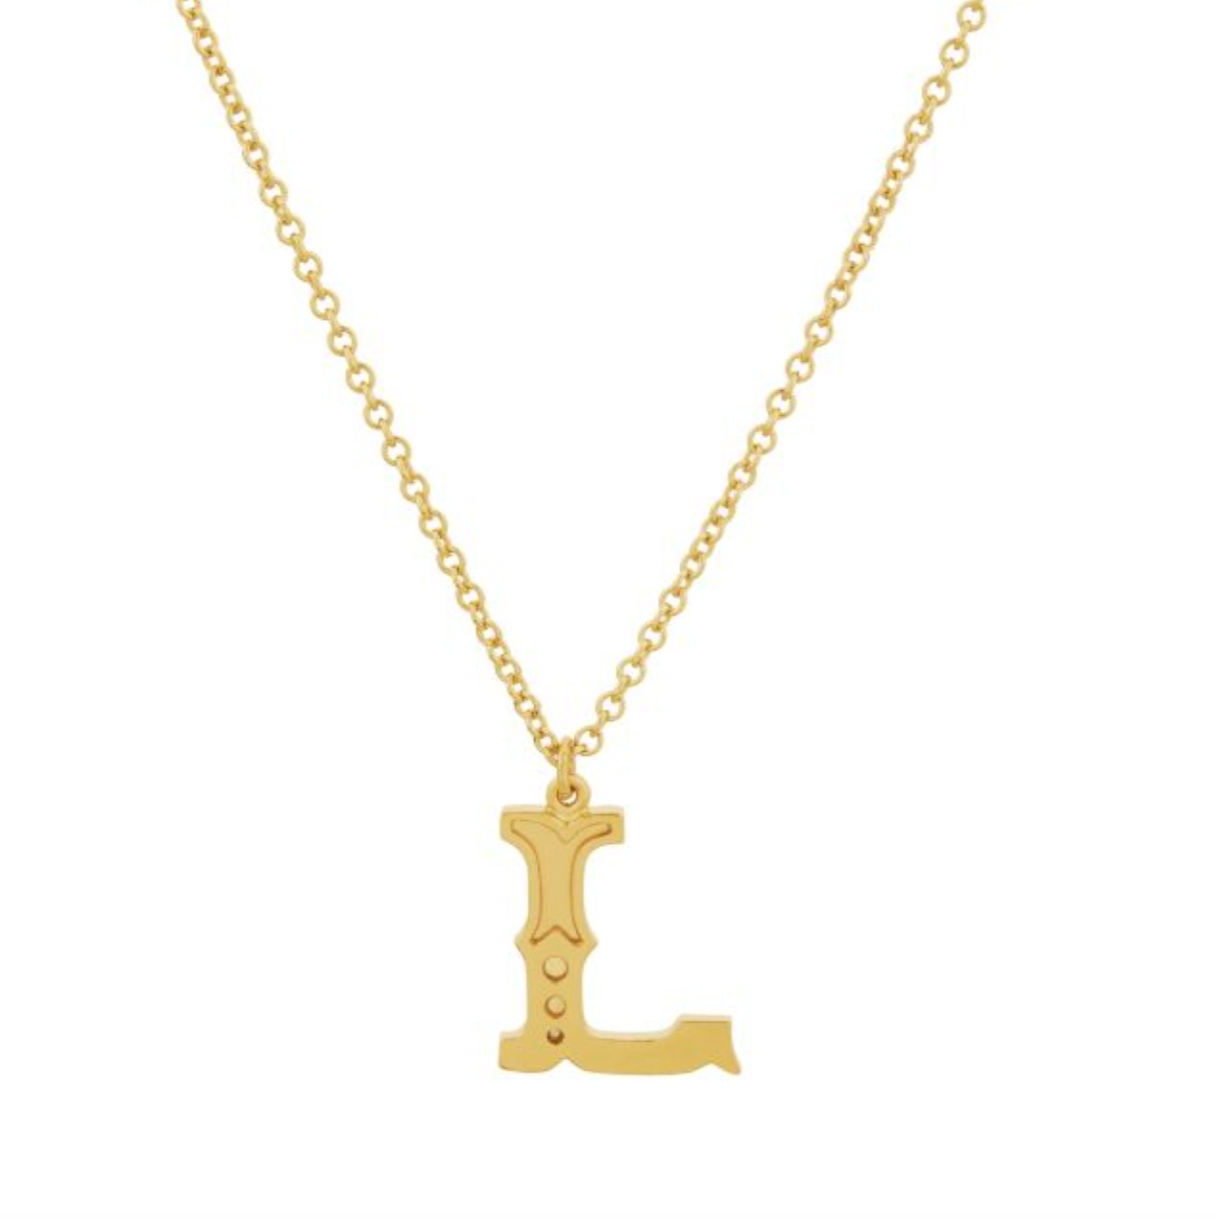 gold gothic l initial pendant necklace on a white background